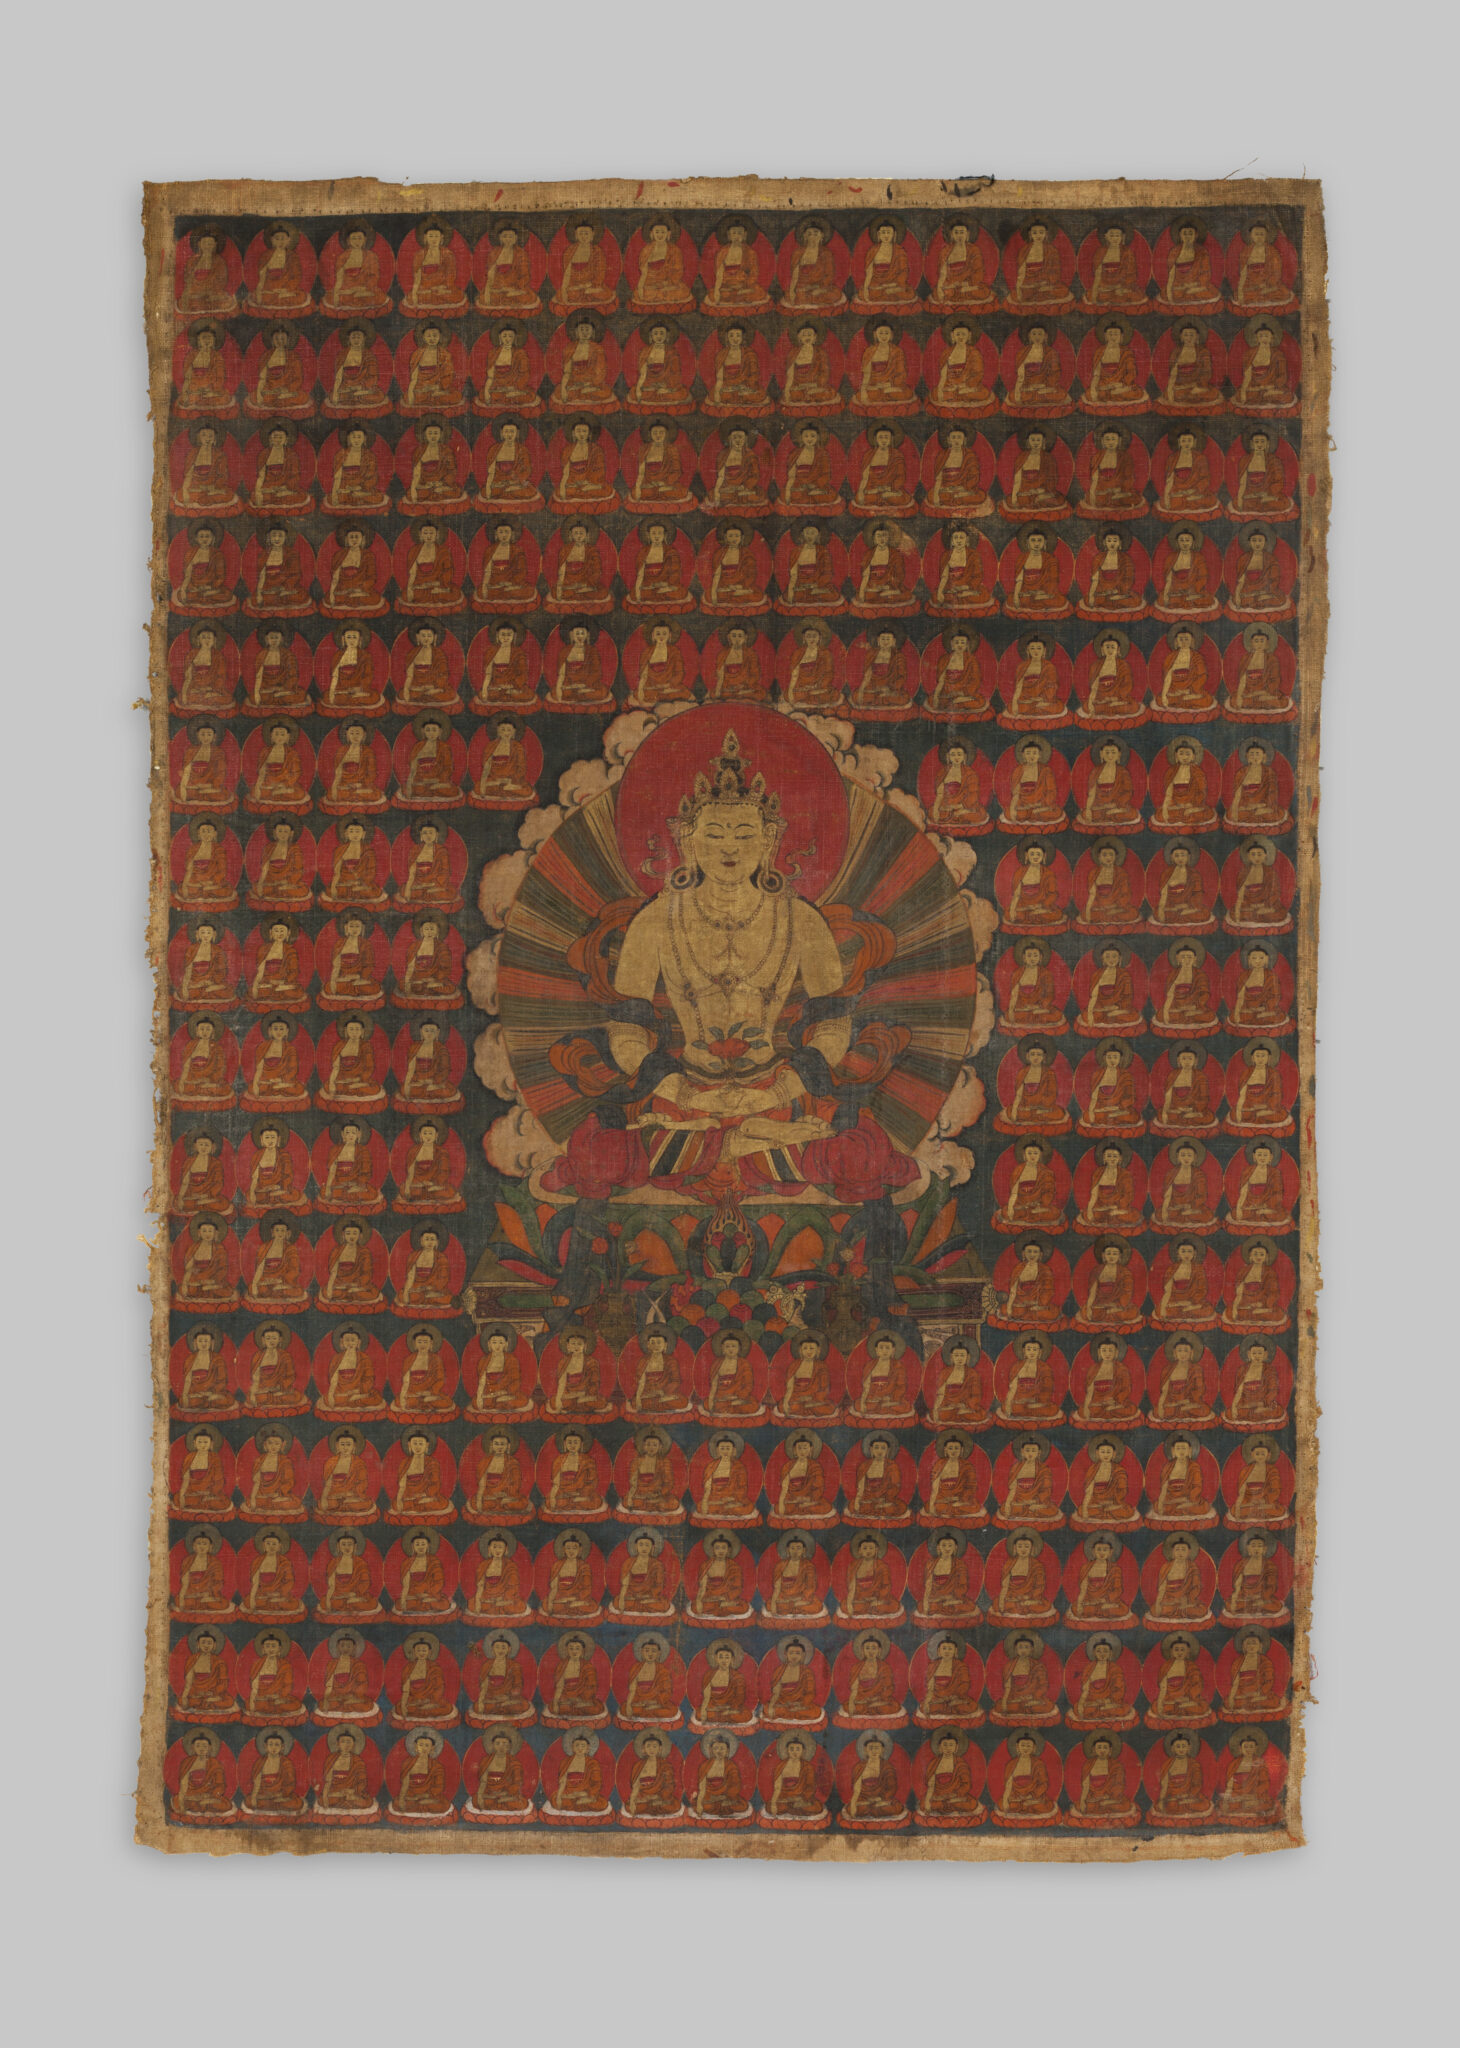 Painting in reds and golds depicting Buddha seated in meditation amidst grid of dozens of miniature portraits